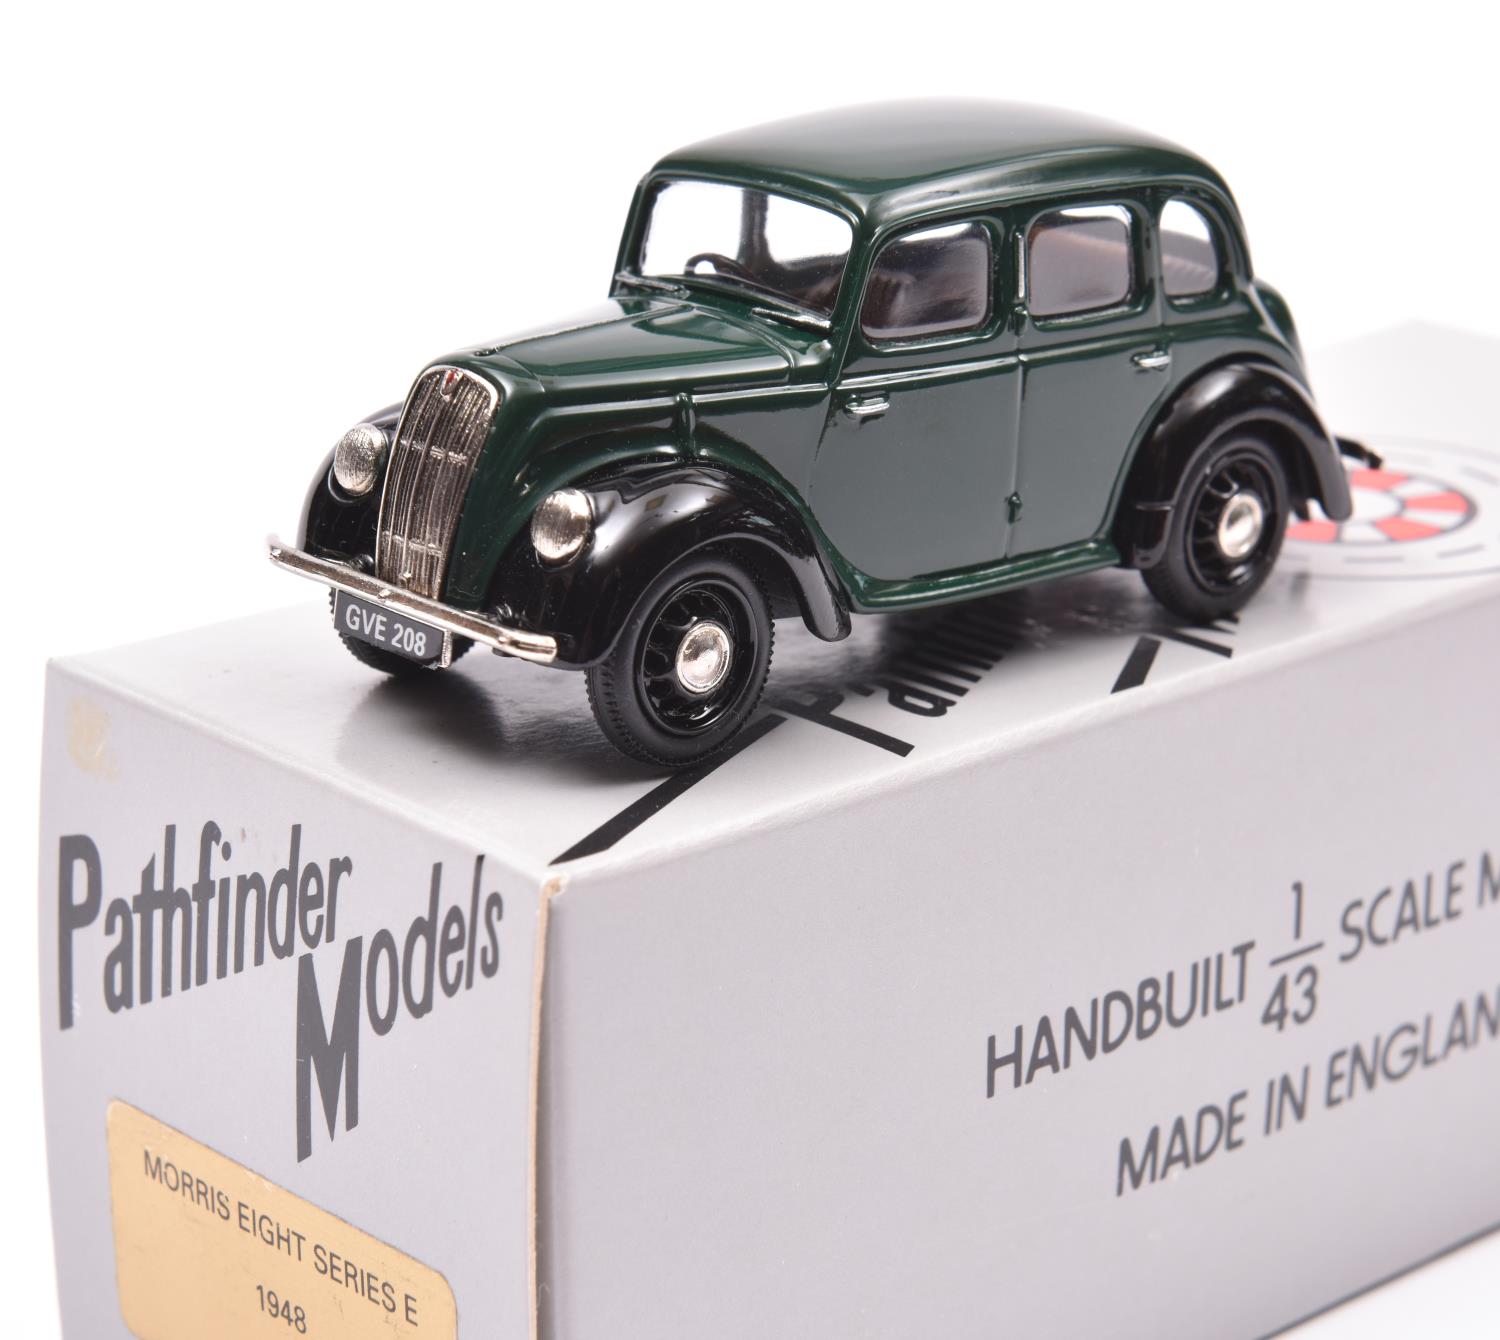 Pathfinder Models PFM 25 1948 Morris Eight Series E. In dark green with black mudguards and brown